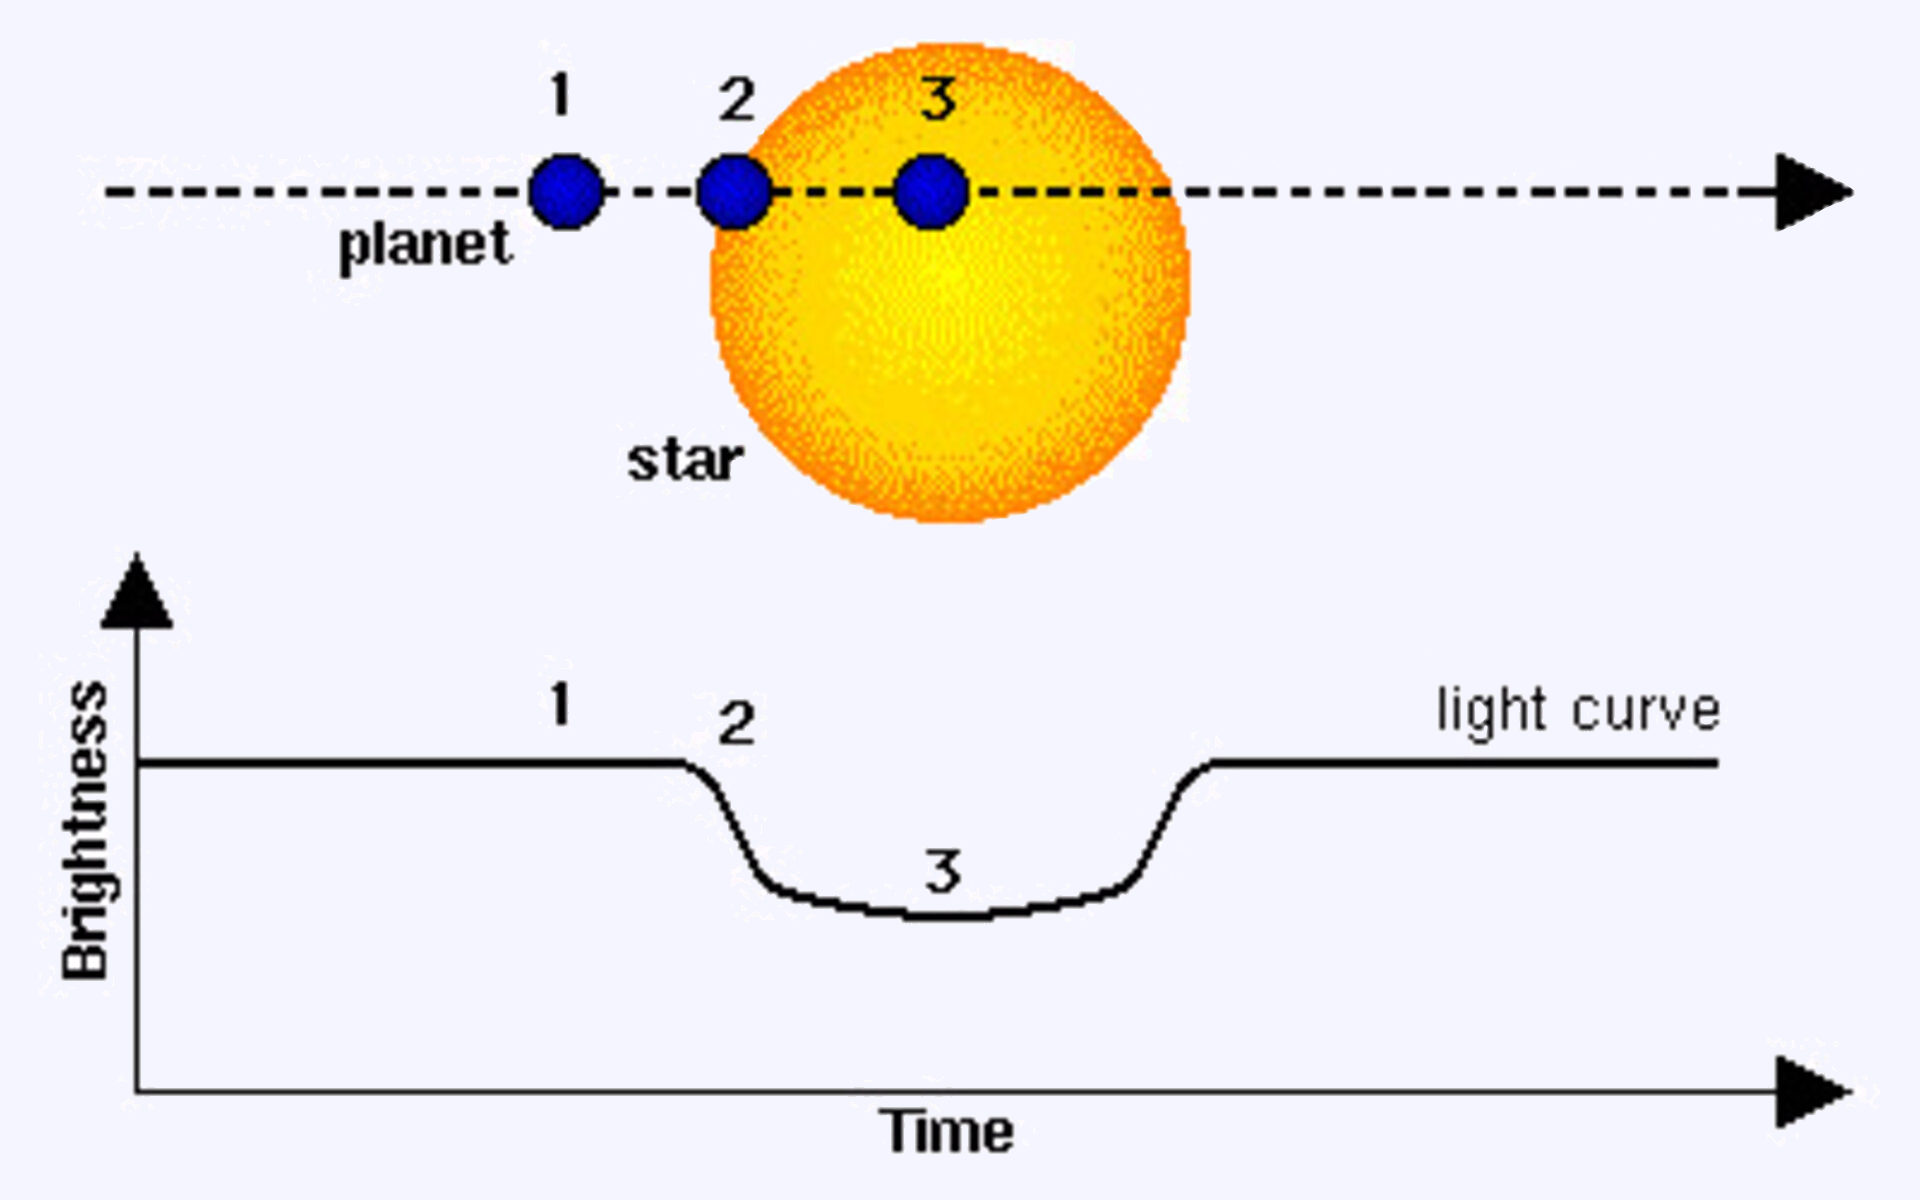 Brightness respect time when a planet is going across a star.